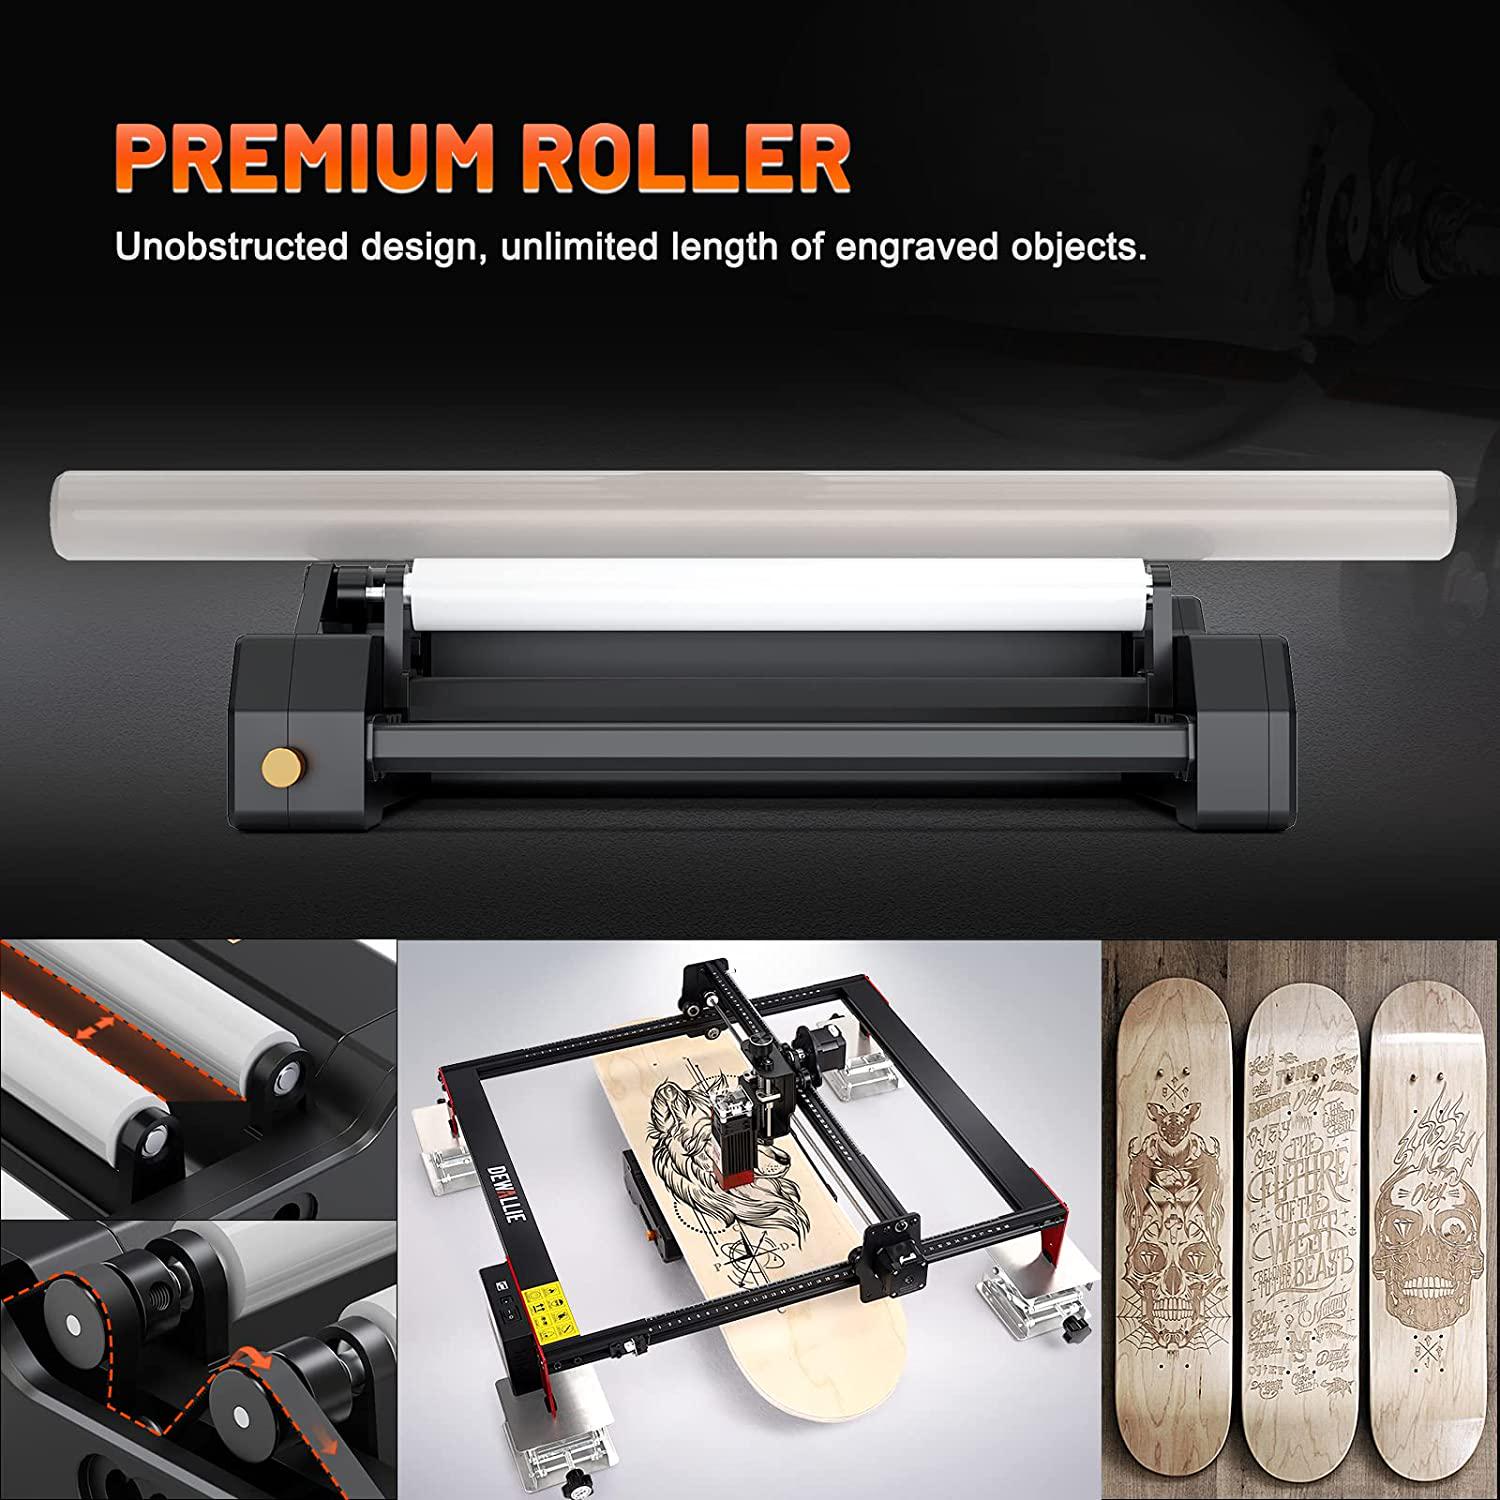 DEWALLIE, Laser Rotation Roller, DEWALLIE Laser Engraver Y-axis Rotary Roller Engraving Module with 360° Rotating, for Engraving Cylindrical Objects Cans